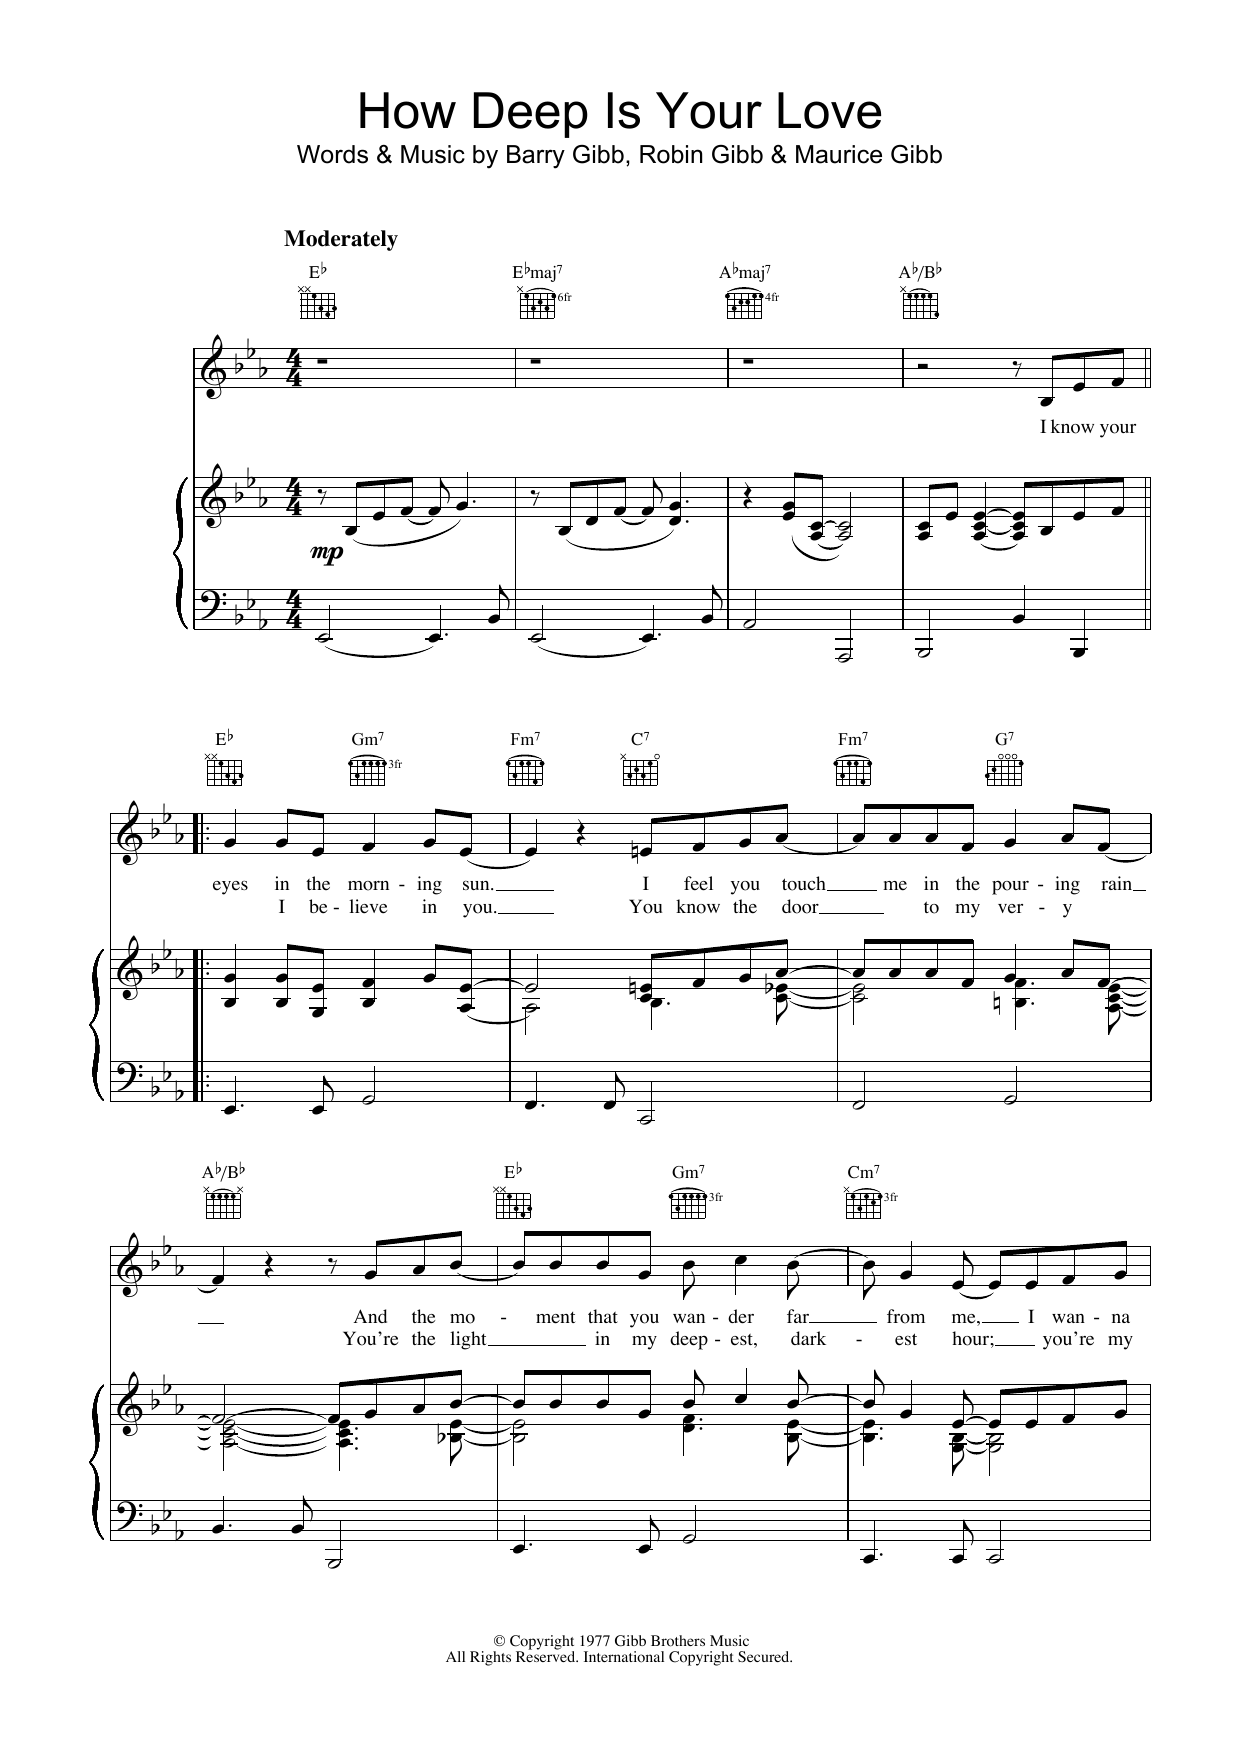 Bee Gees How Deep Is Your Love sheet music notes printable PDF score